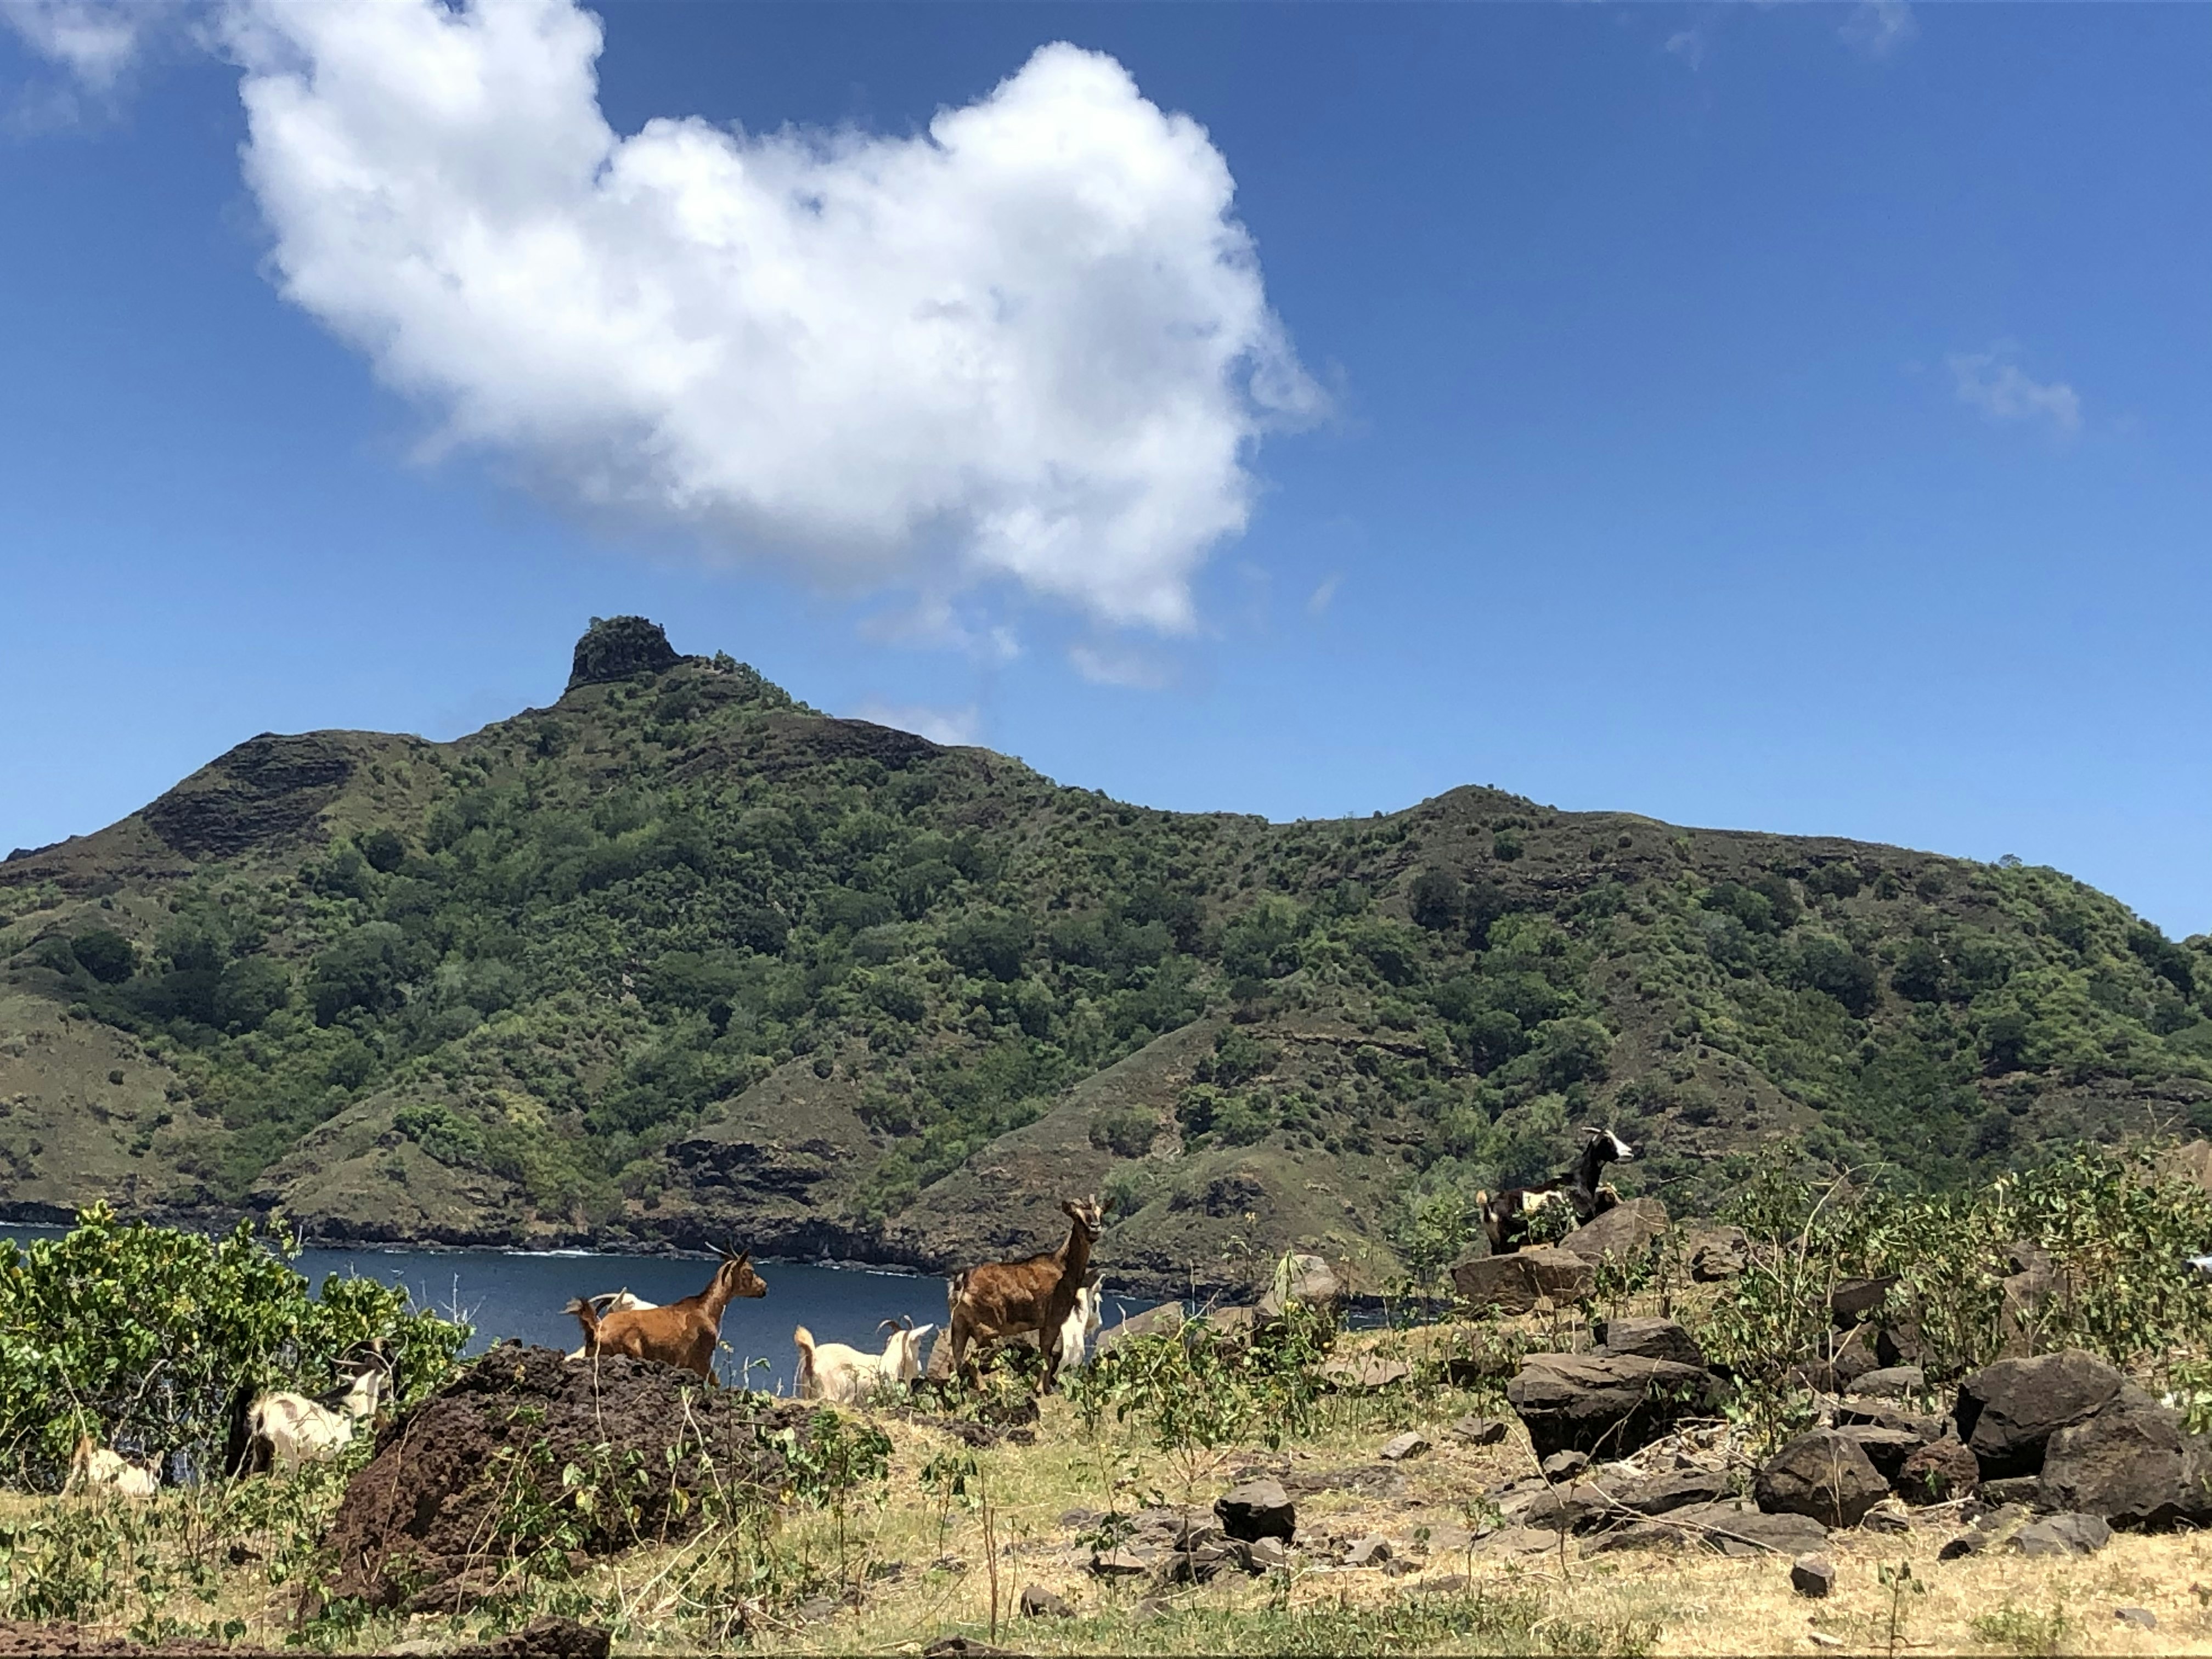 Goats roam freely in the hills of Nuku Hiva